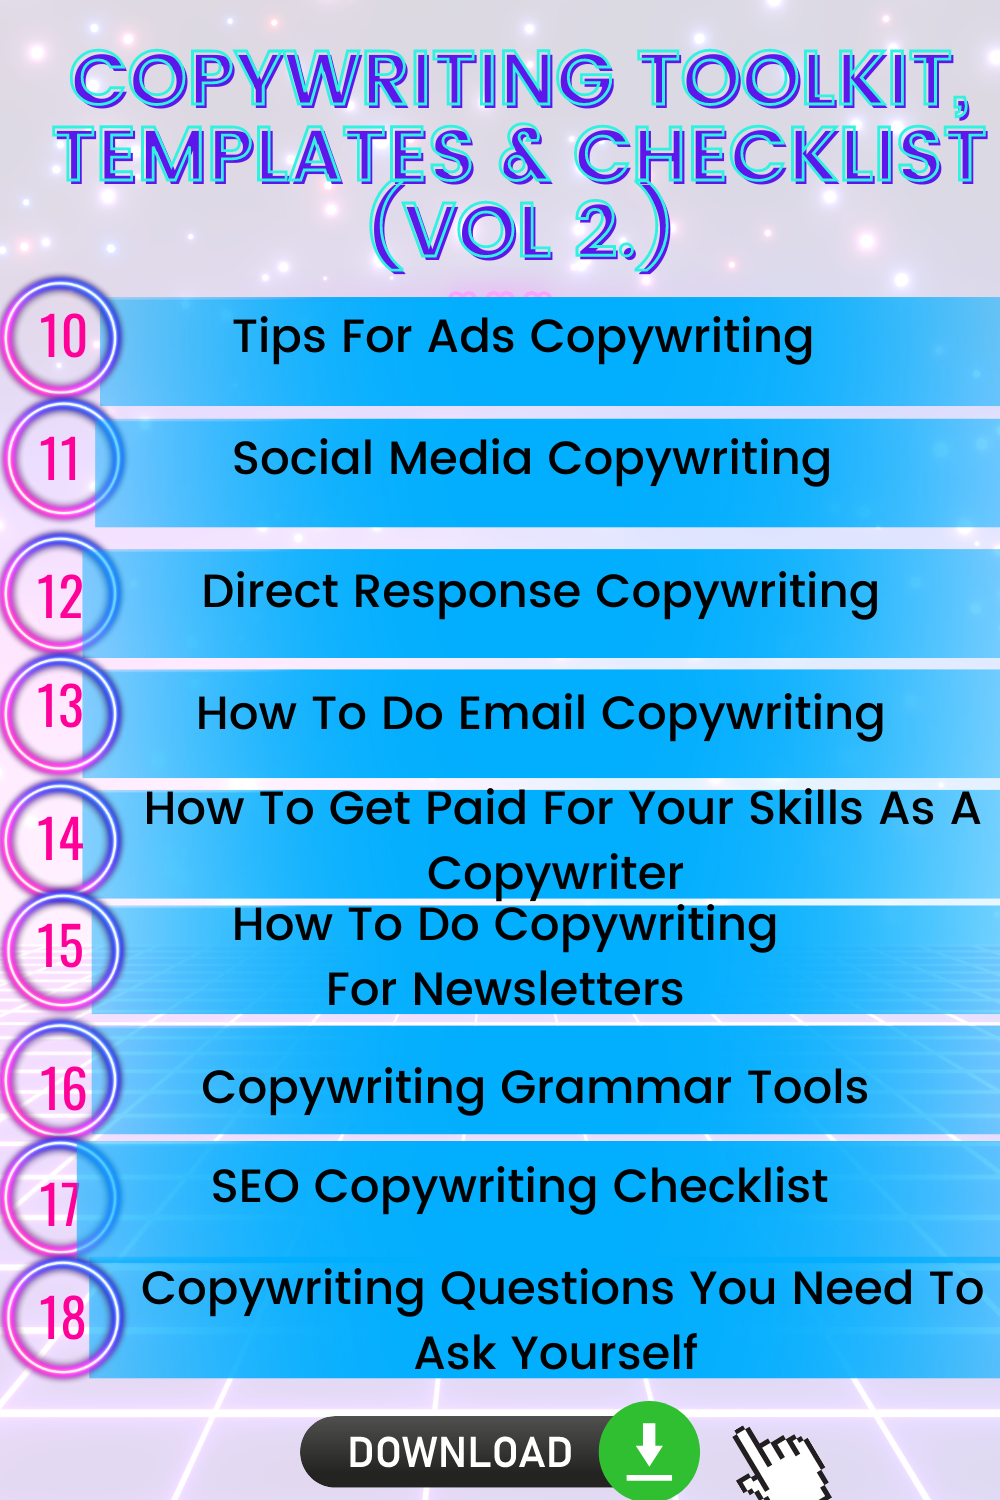 Copywriting Questions You Need To Ask Yourself